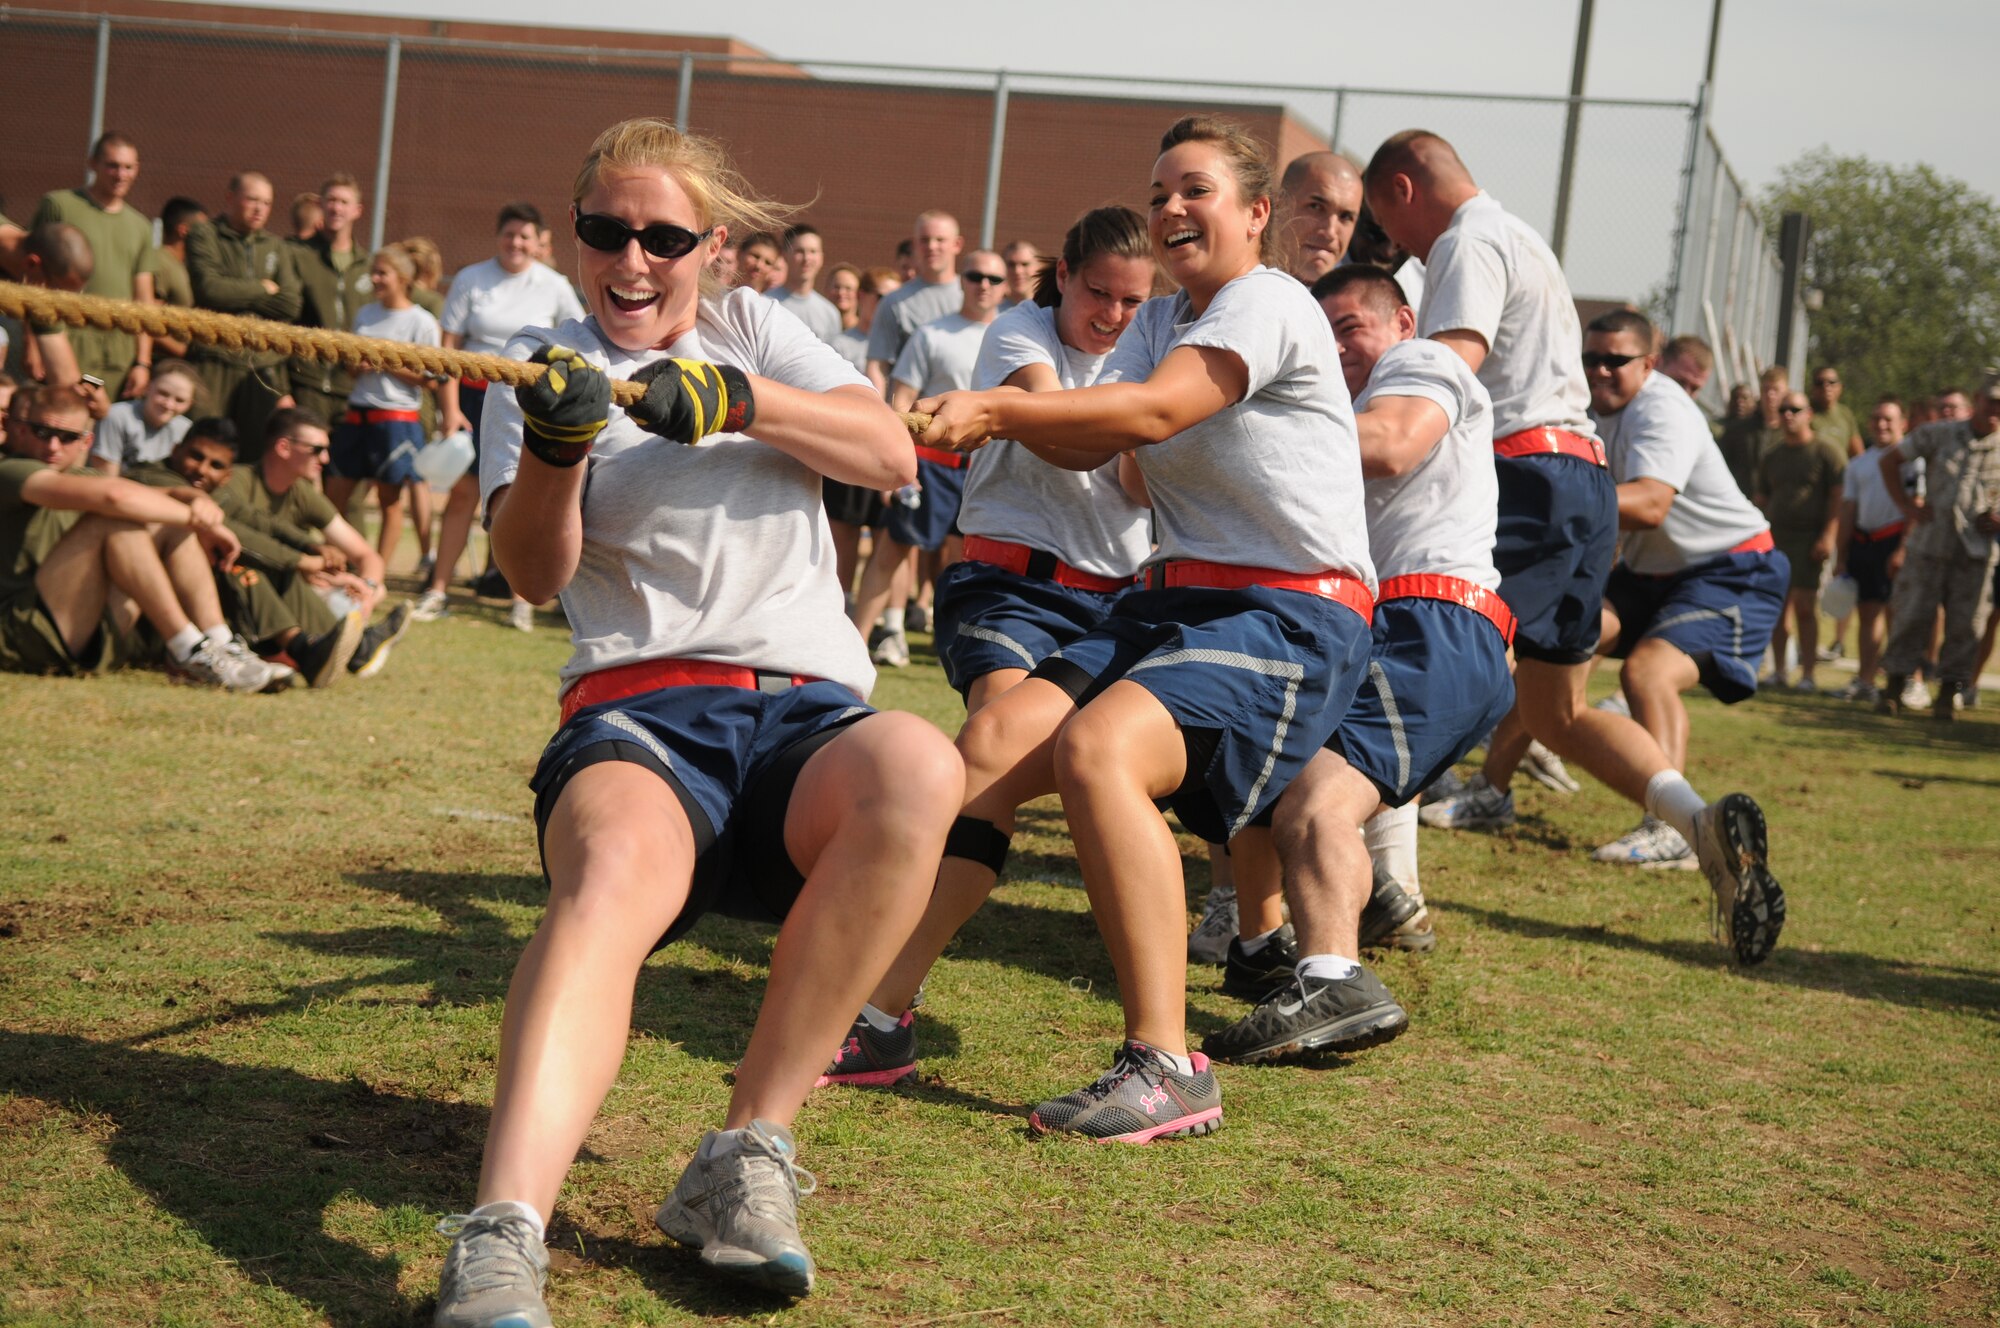 GOODFELLOW AIR FORCE BASE, Texas -- Airmen from the 312th Training Squadron battle it out in a  tug-of-war competition May 27. Team Goodfellow devoted the day to safety and sports to kick off the 101 critical days of summer. (U.S. Air Force photo/Staff Sgt. Heather L Rodgers)